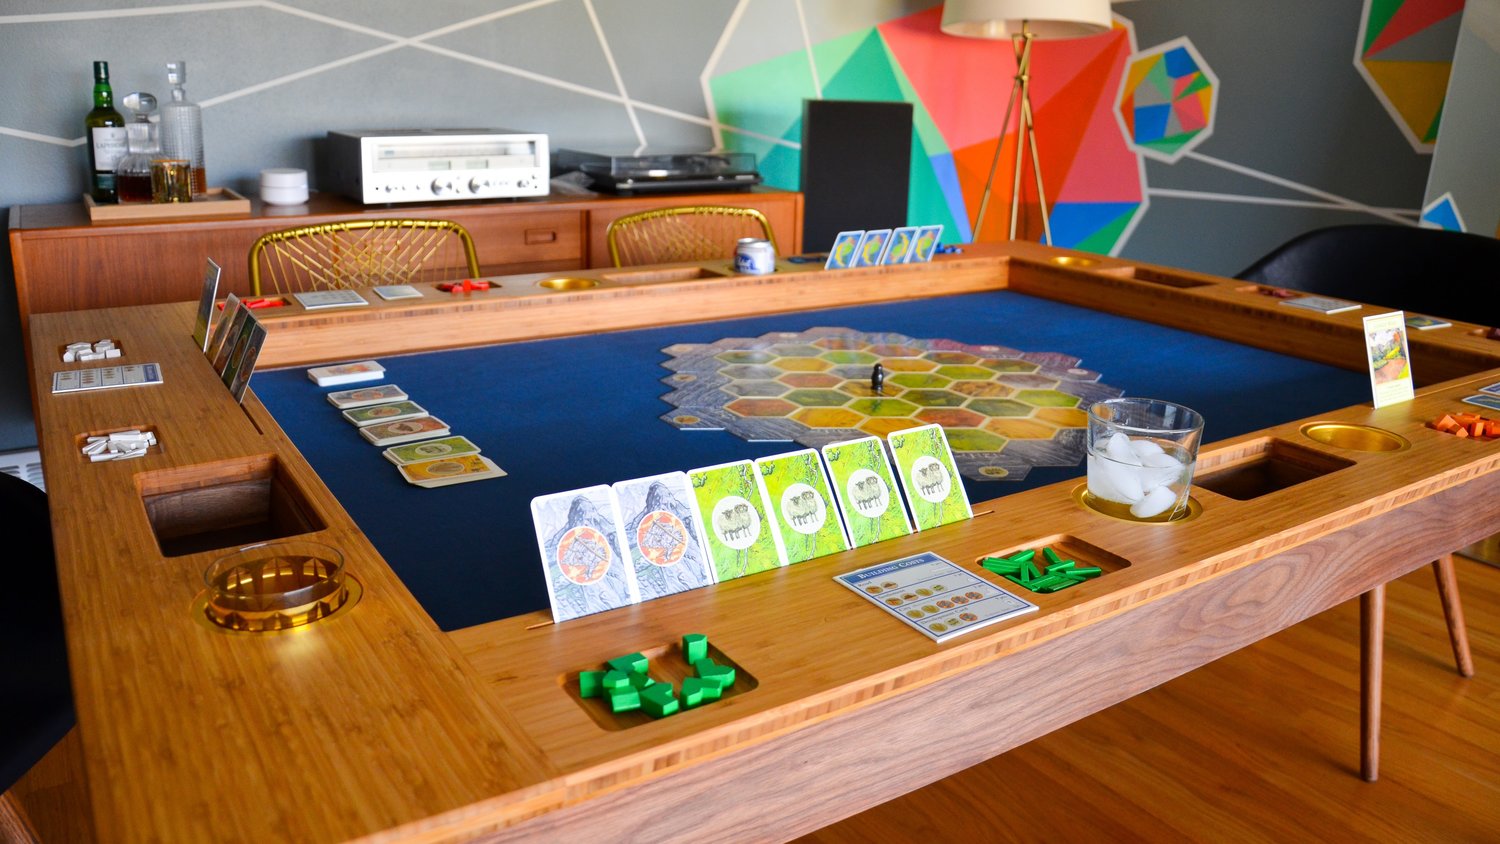 Board Gaming Table - Standard Mid-Century Modern Dresden in action